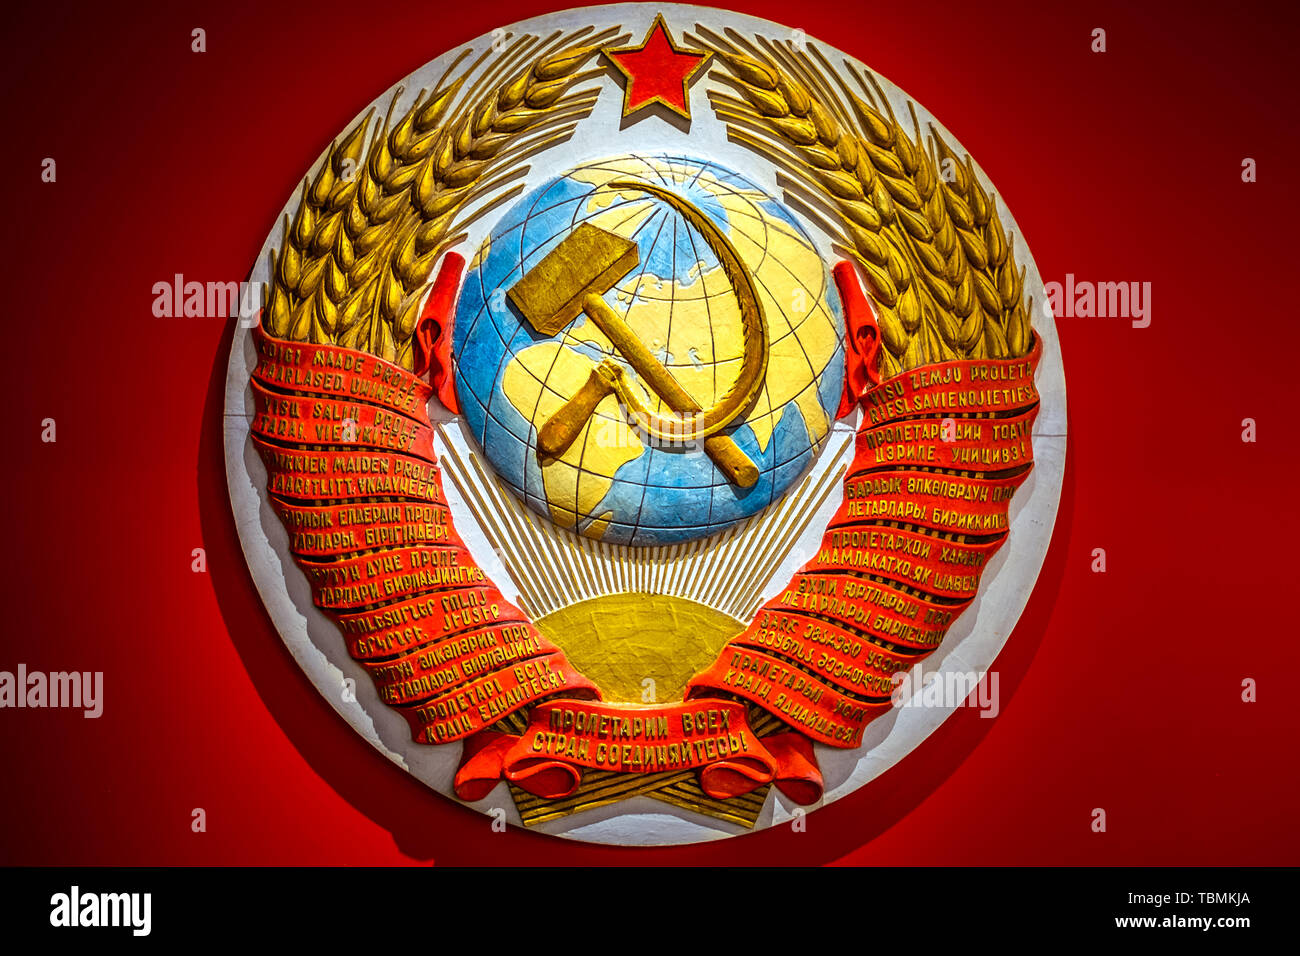 Malaga, Spain - August 23, 2018. Emblem of USSR in the Museum dedicated to Russian art & culture from Malaga city, Spain Stock Photo